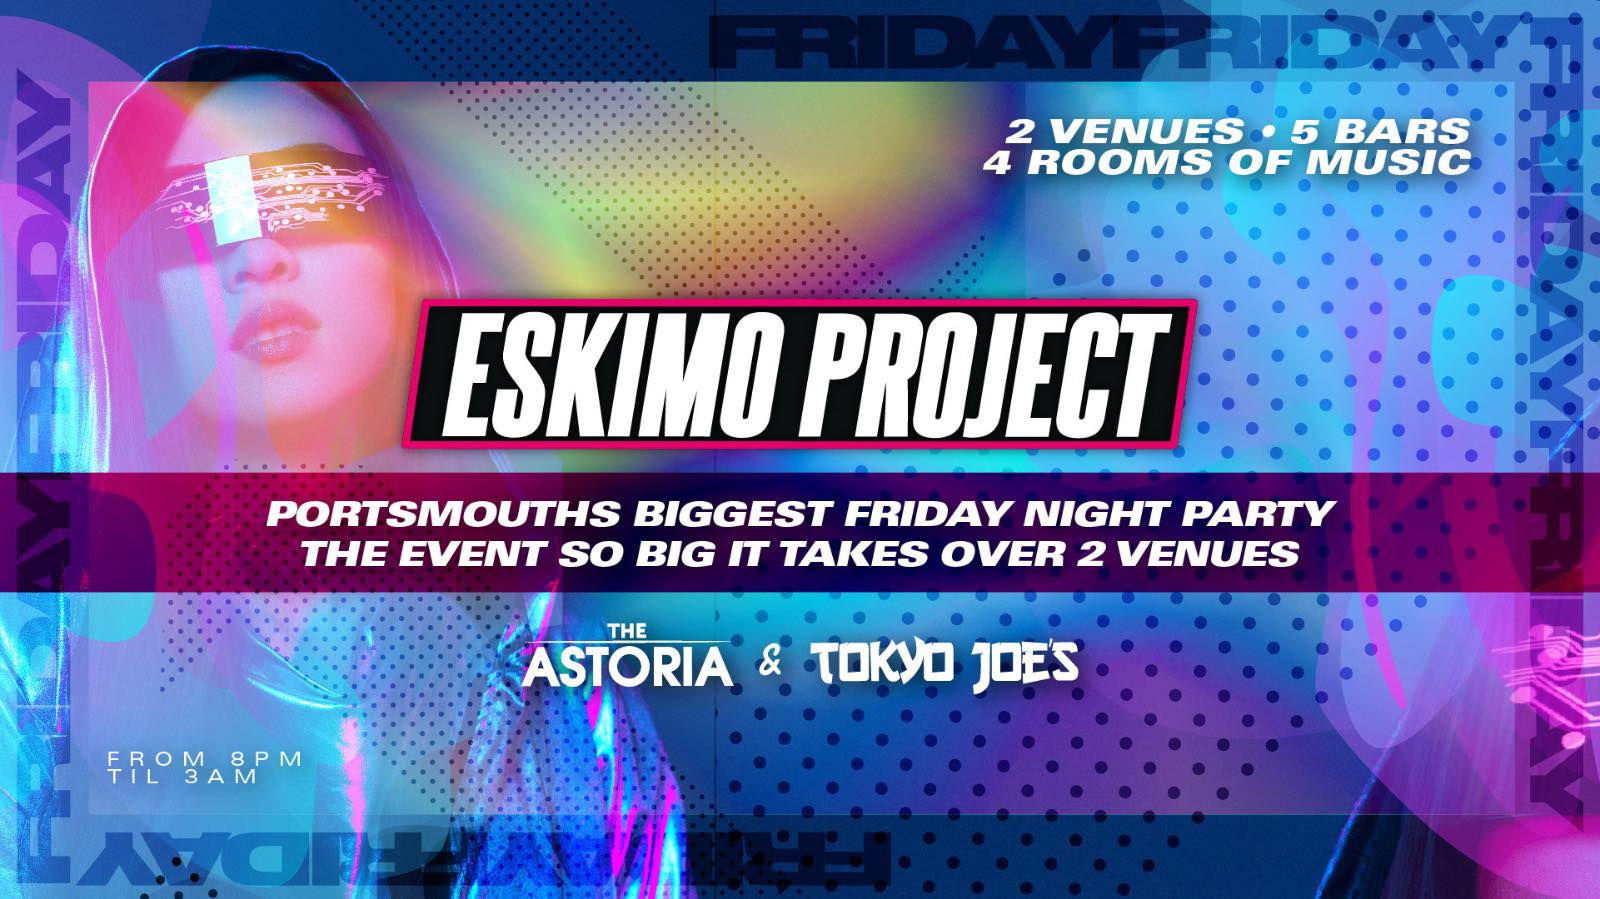 The Eskimo project, the event so big it takes over both Tokyo Joes and The Astoria